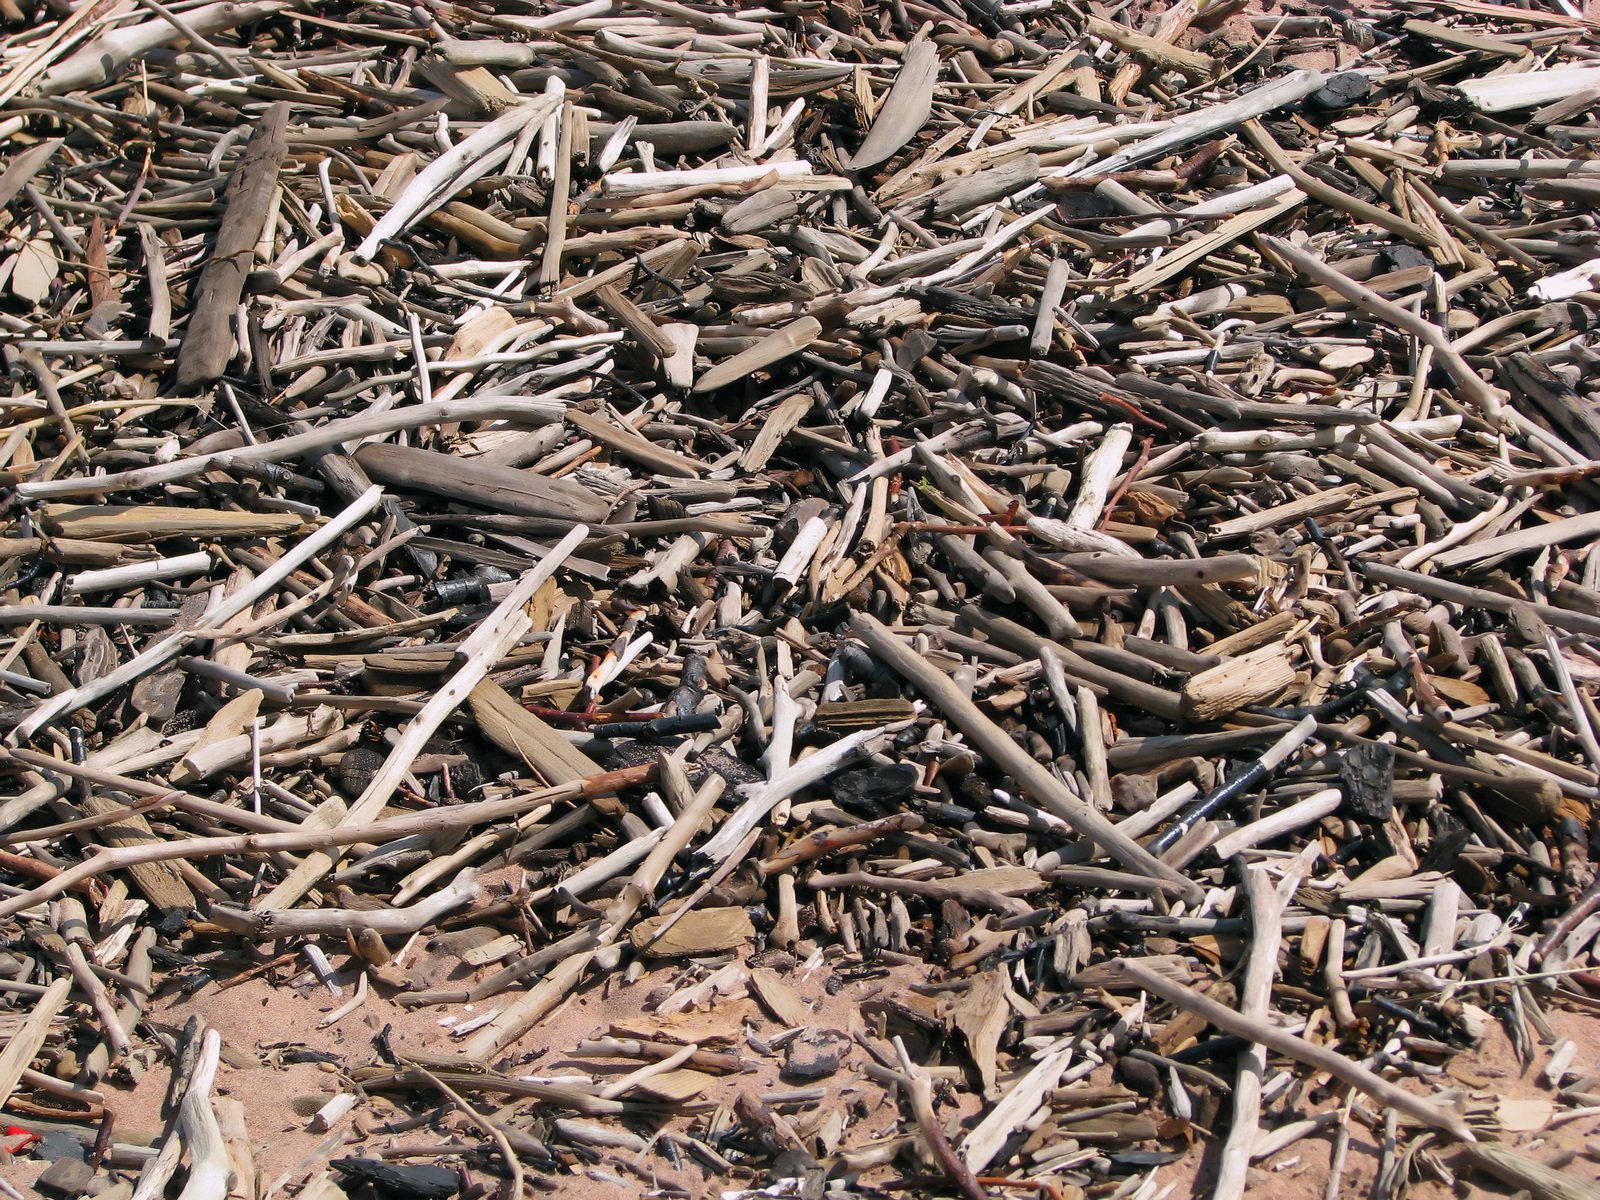 there is a pile of many different pieces of wood